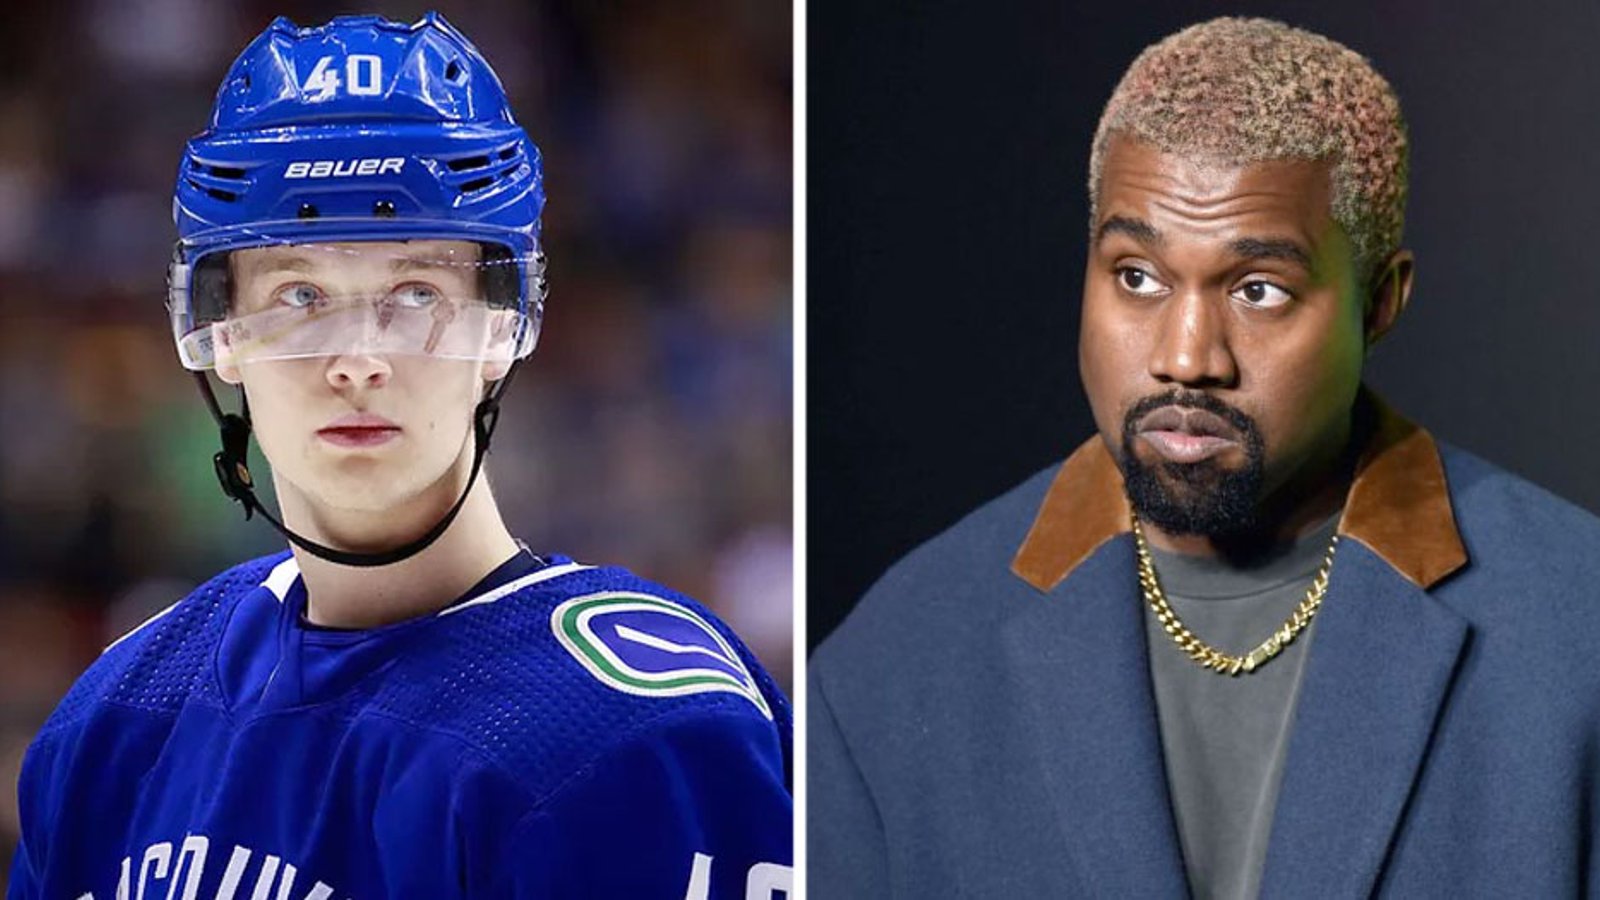 Kanye West gets Elias Pettersson's former team in Sweden banned from Twitter